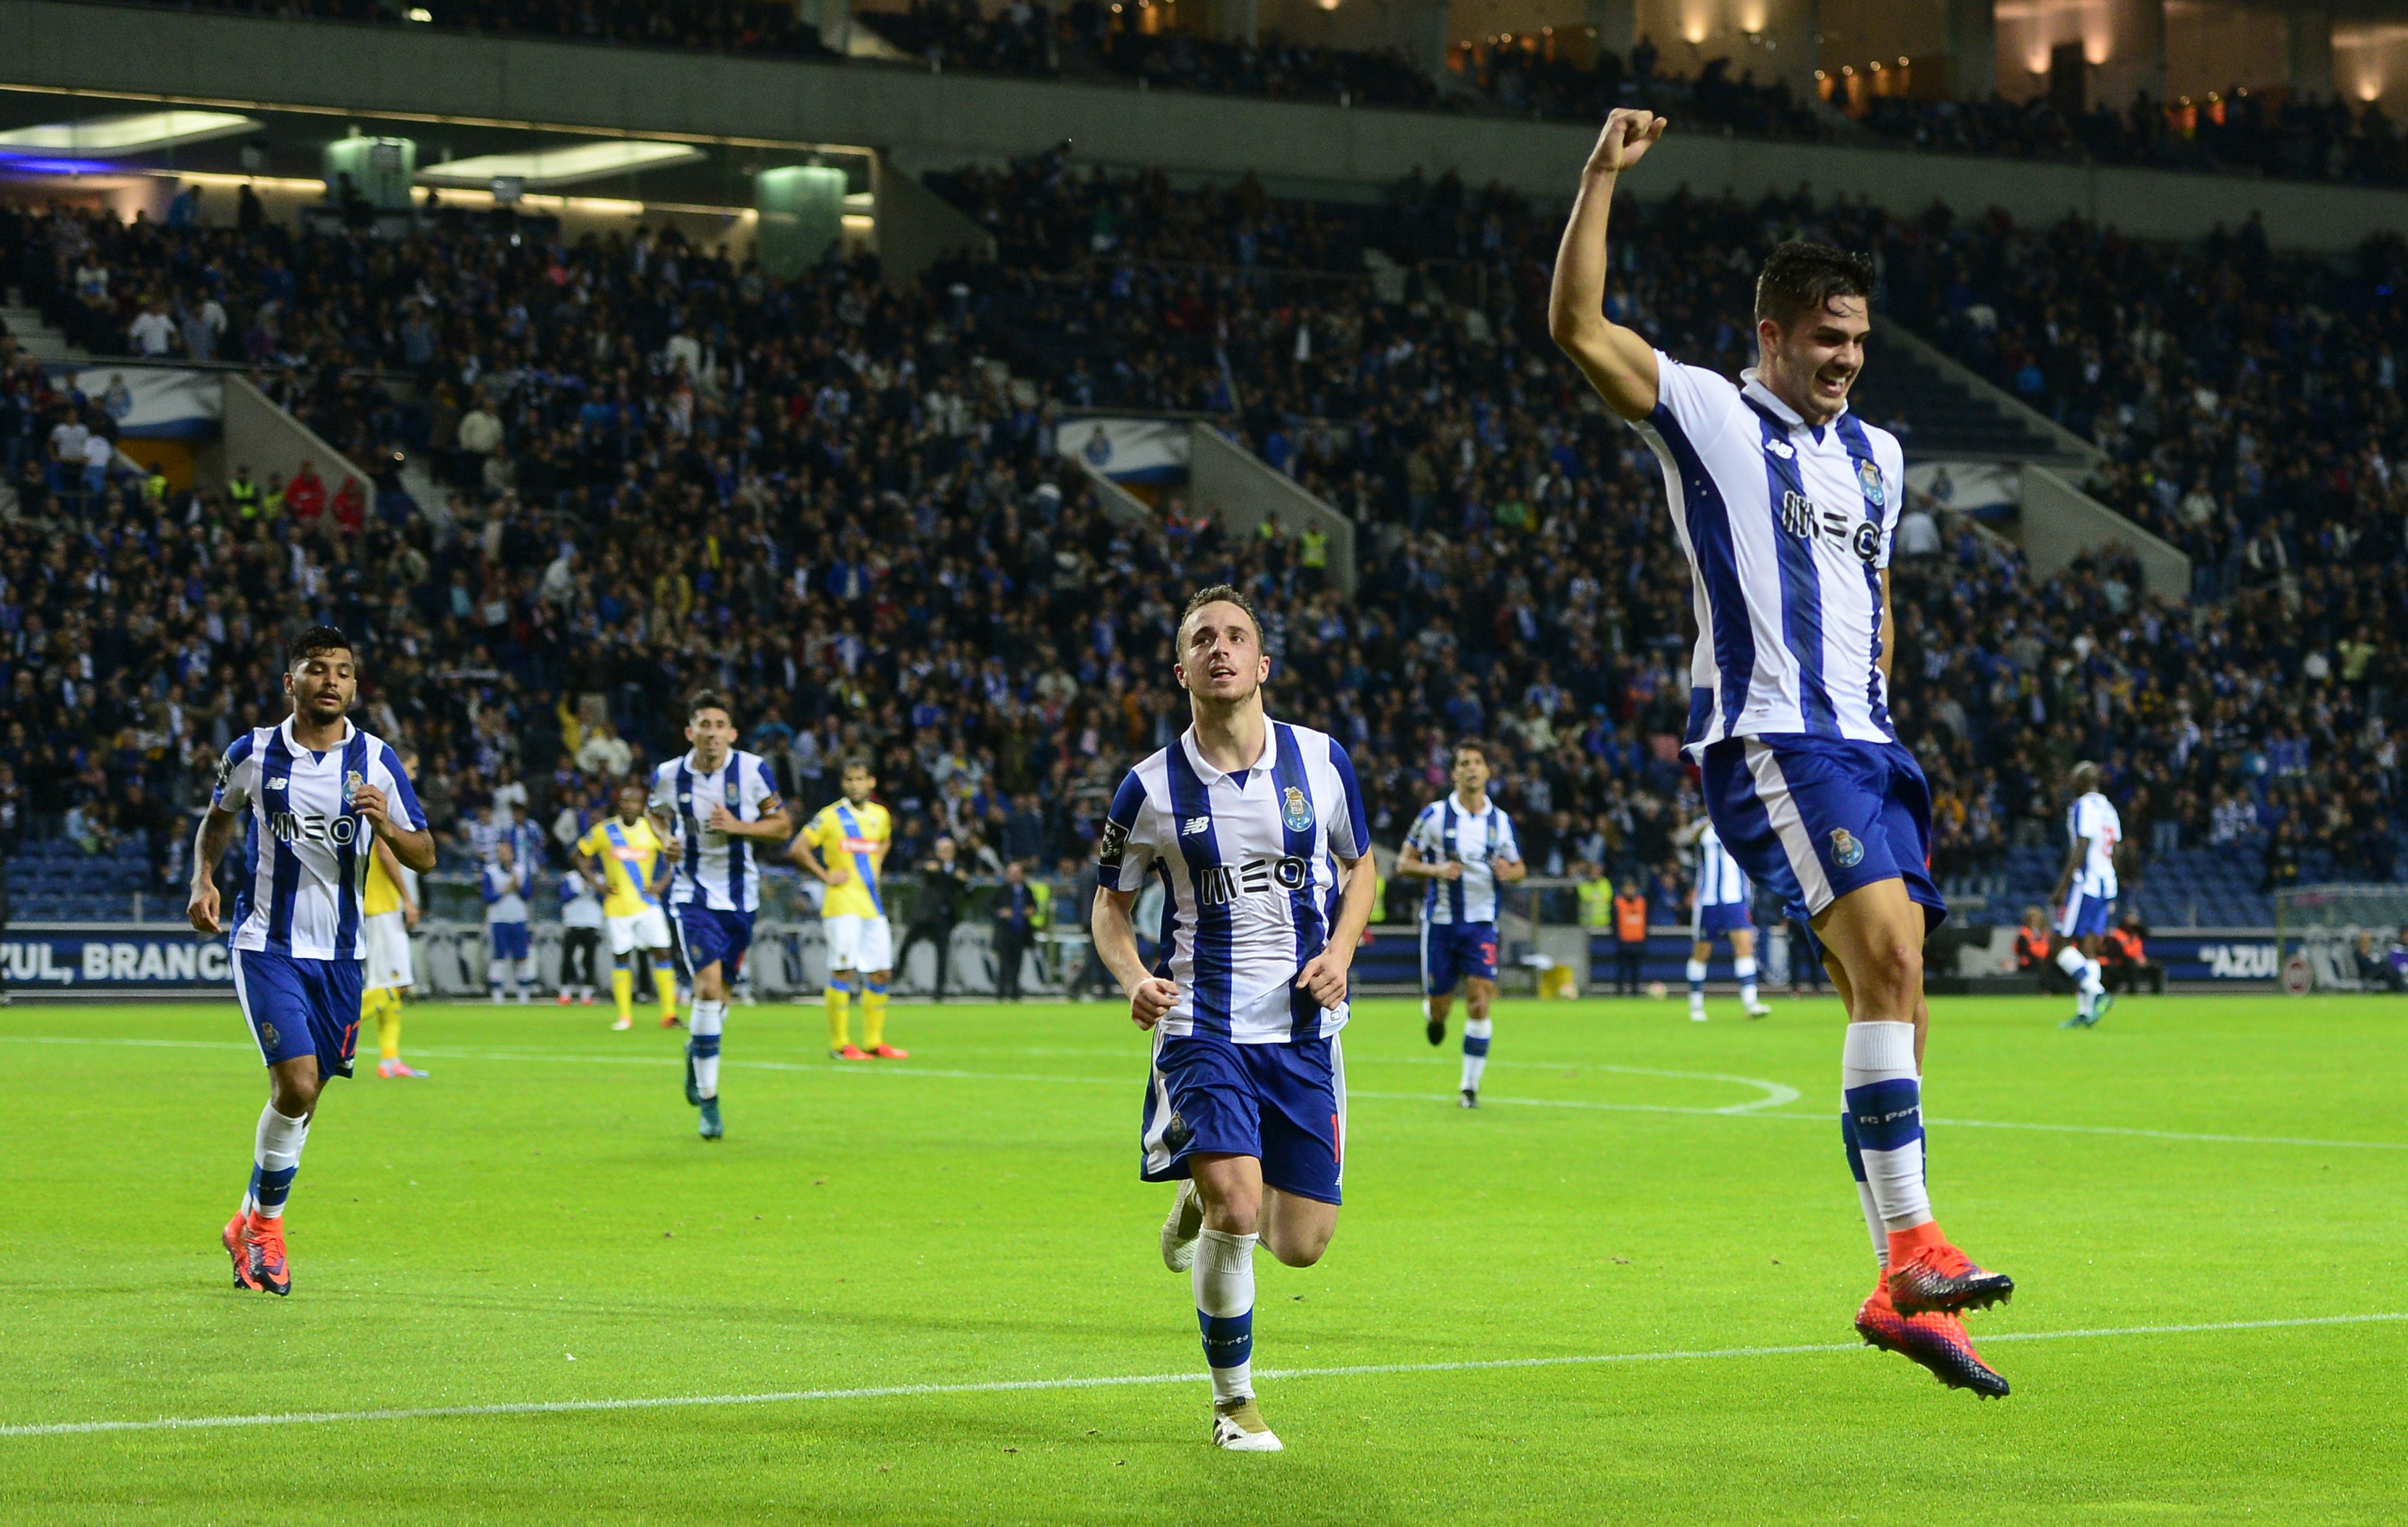 Porto's midfielder Andre Silva (R) celebrates after scoring a goal during the Portuguese league football match FC Porto vs FC Arouca at the Dragao stadium in Porto on October 22, 2016. / AFP / MIGUEL RIOPA        (Photo credit should read MIGUEL RIOPA/AFP/Getty Images)